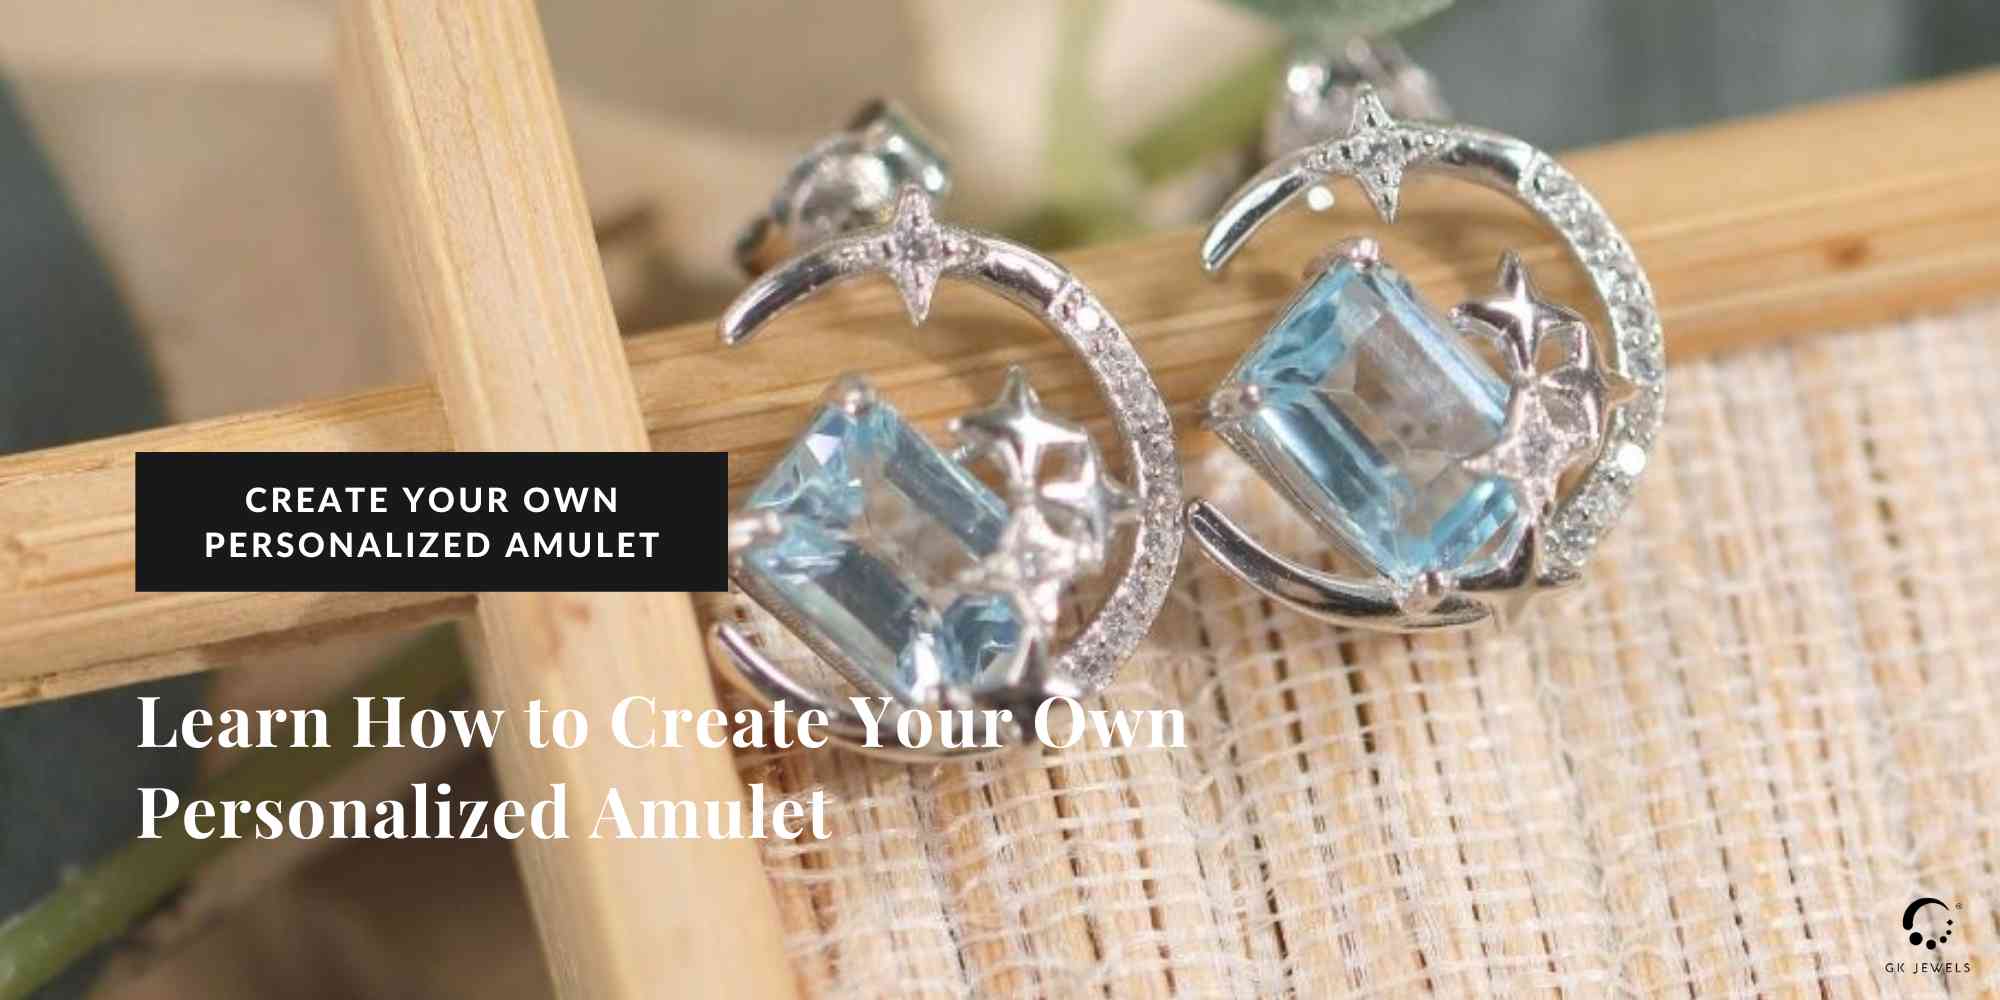 Create Your Own Personalized Amulet